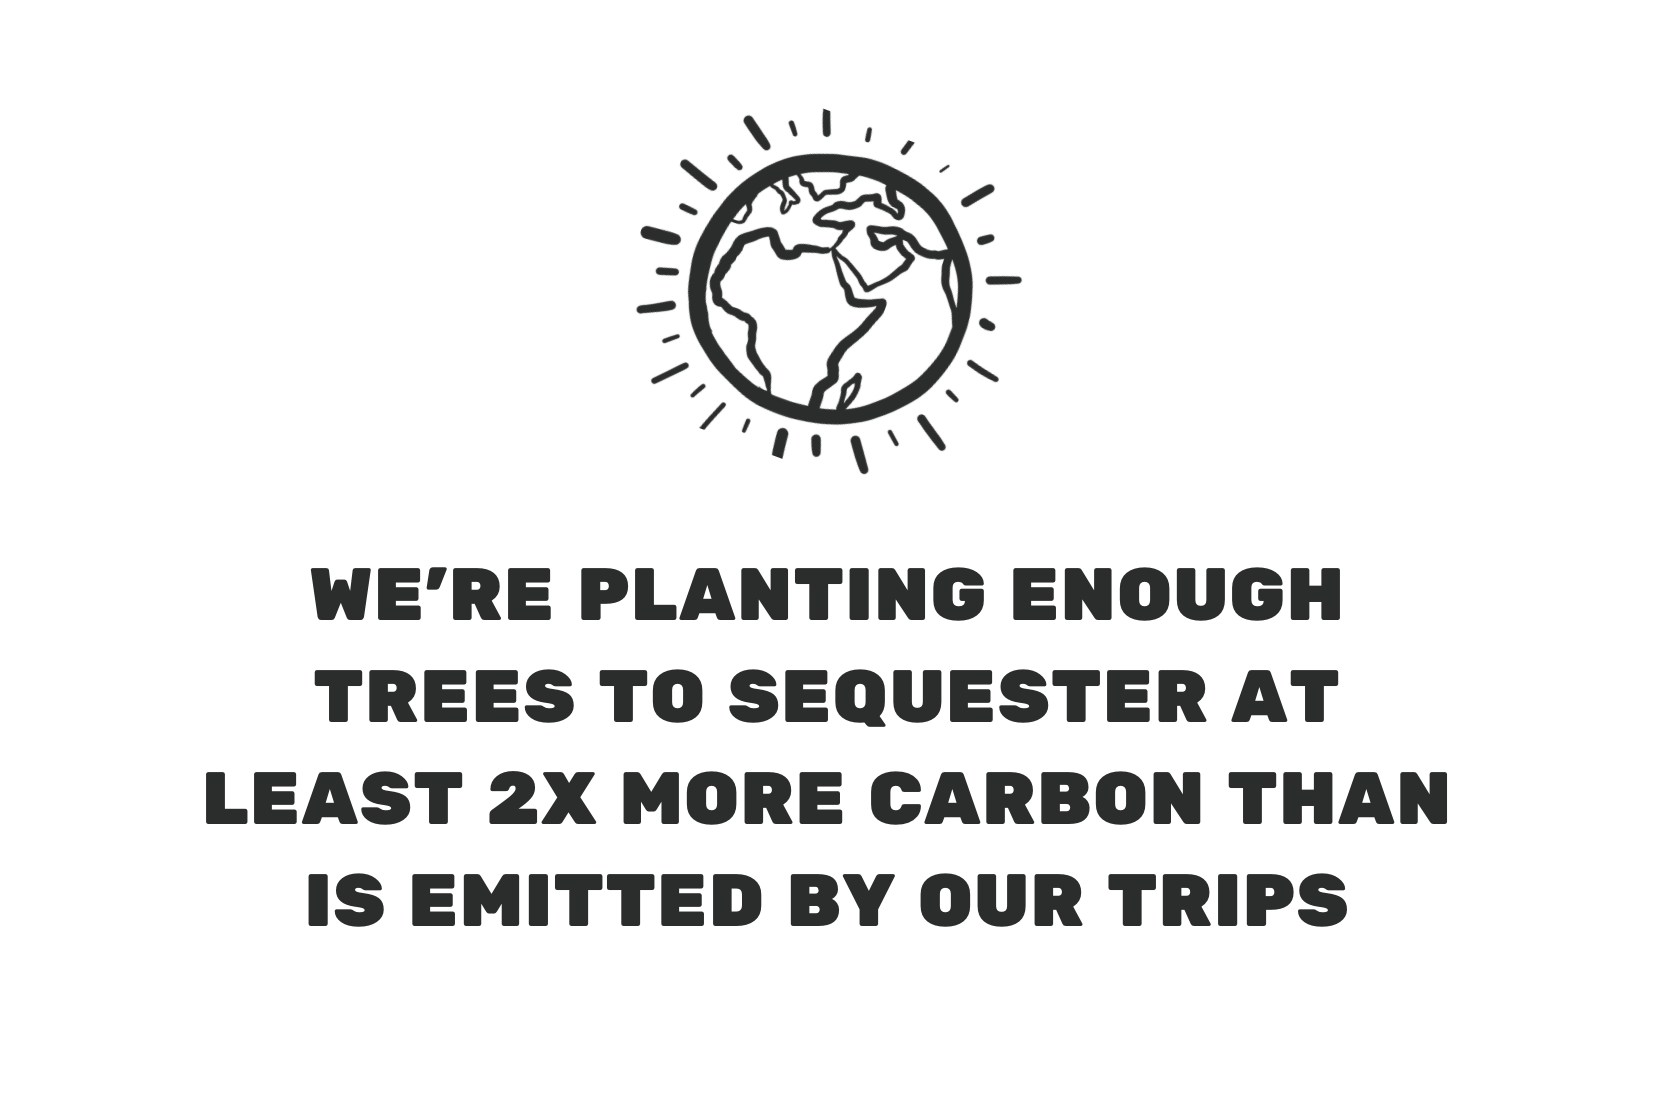 Much Better Adventures image, which states: we're planting enough trees to sequester at least 2x more carbon than is emitted by our trips.